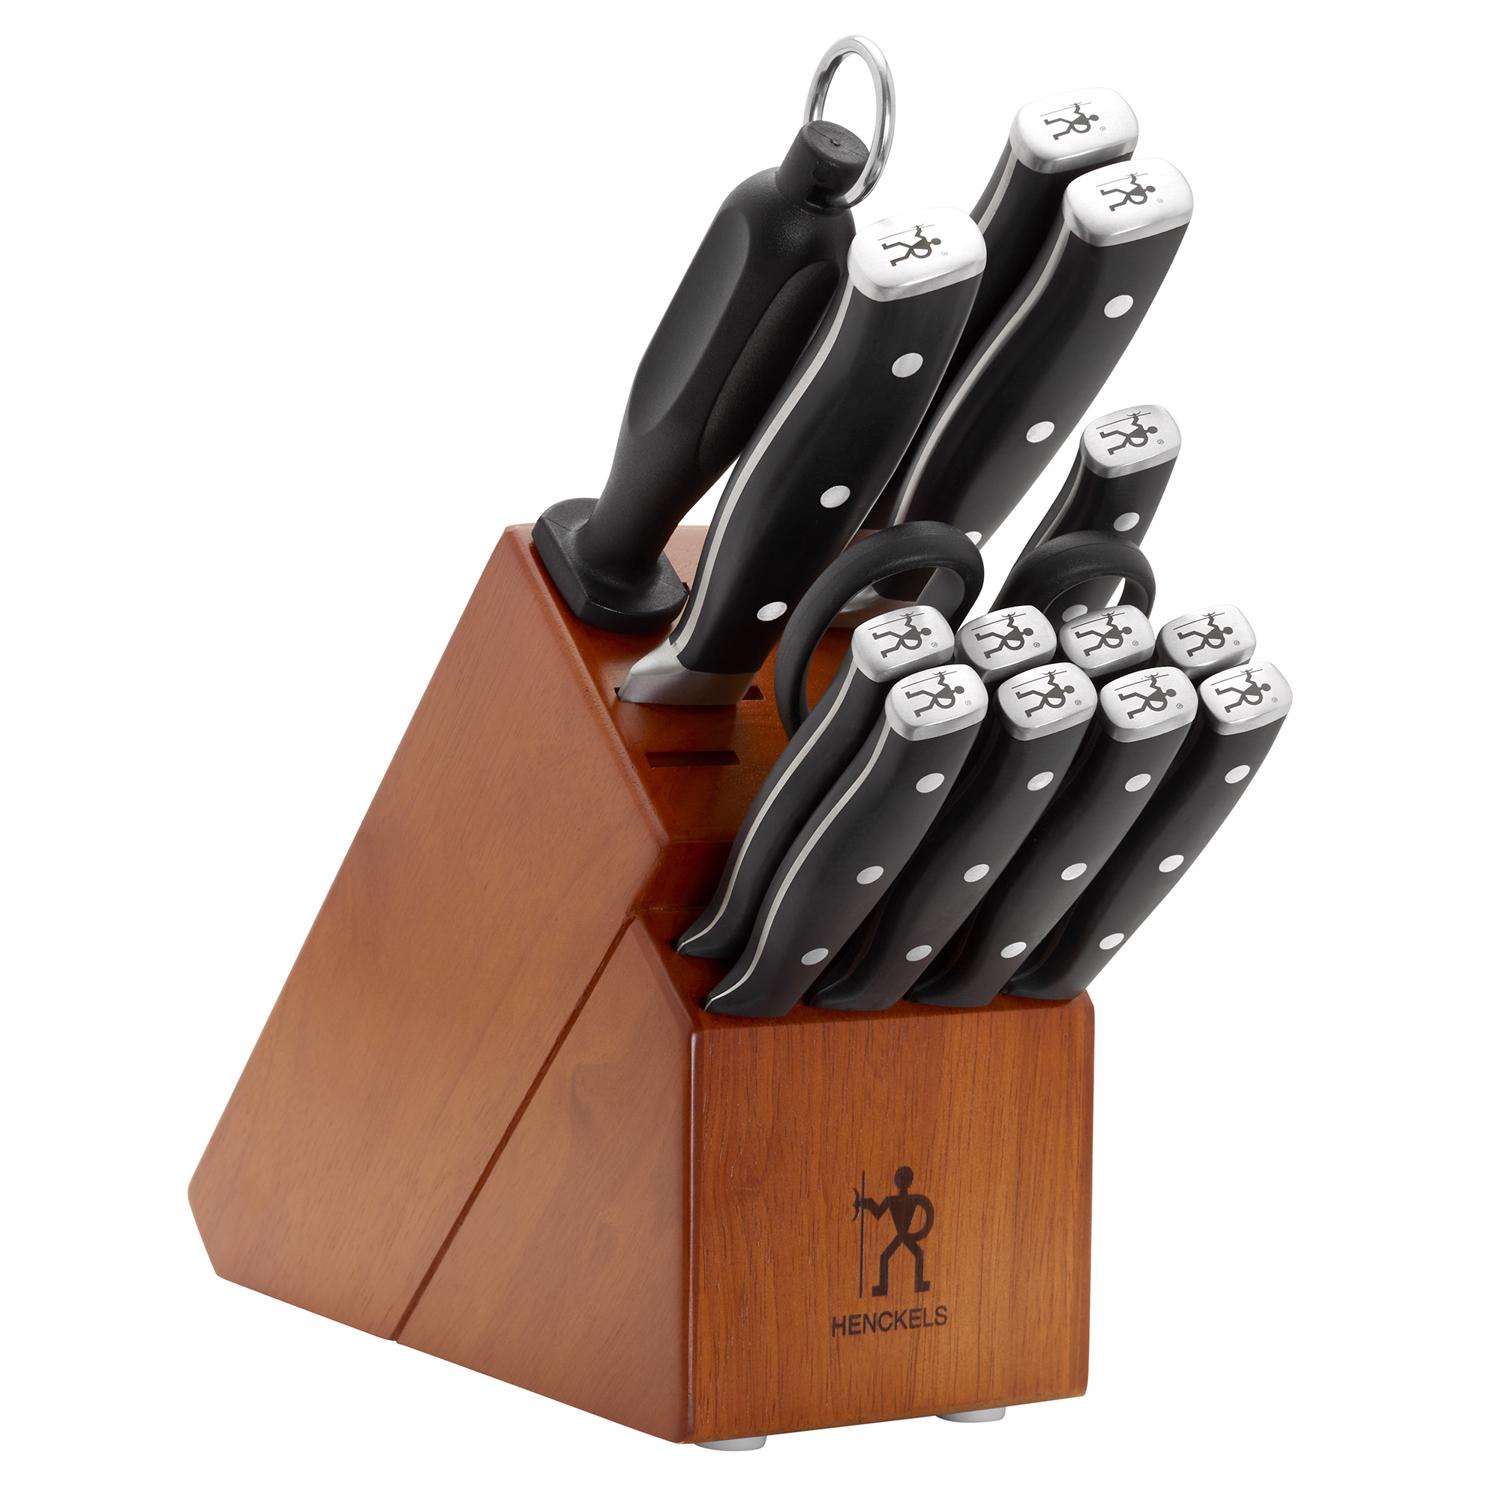 Henckels 11 Piece Hi Definition Stainless Steel Knife Set with